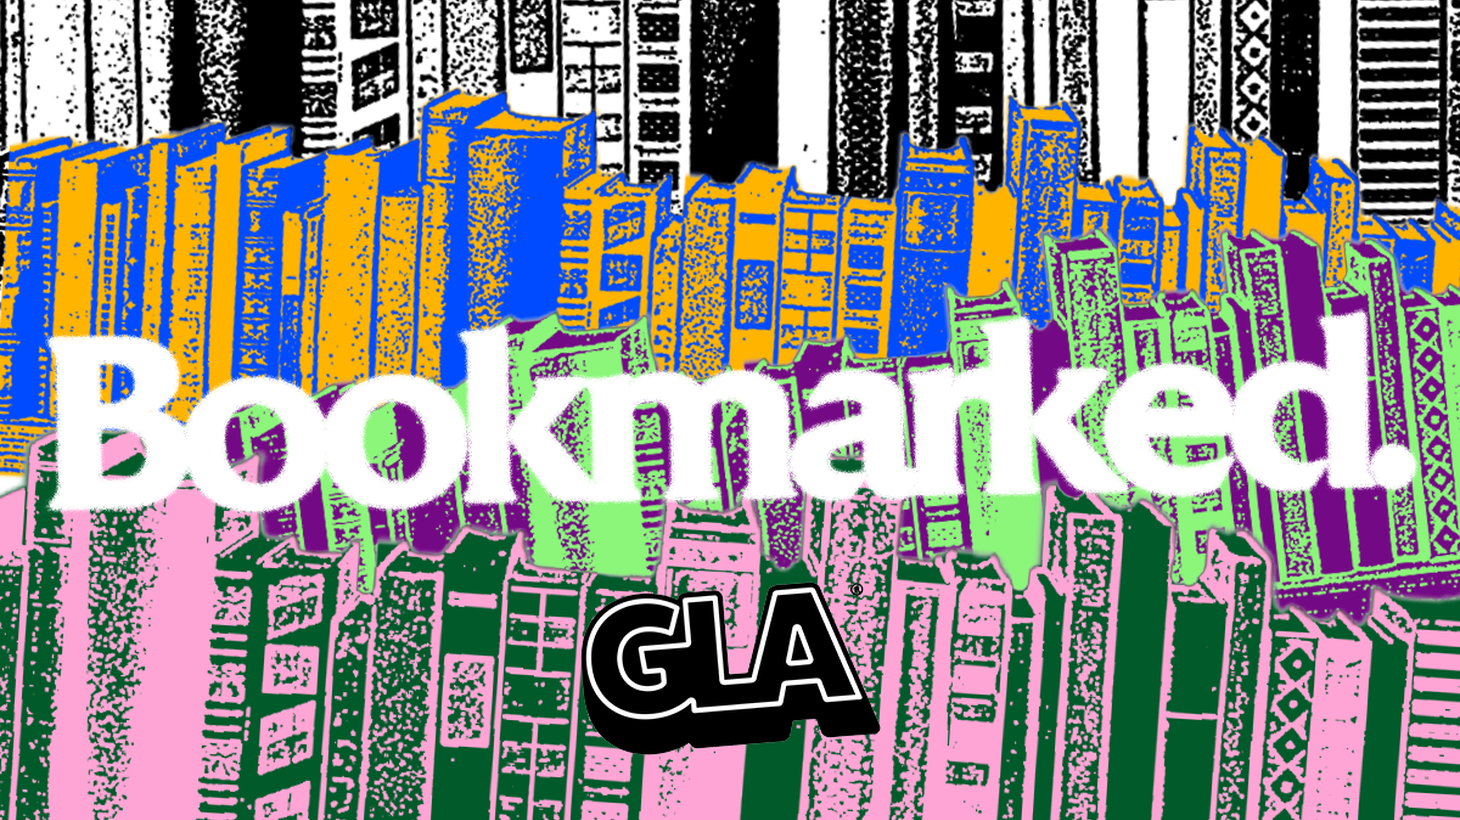 Greater LA’s new series “Bookmarked” features talks with SoCal authors.